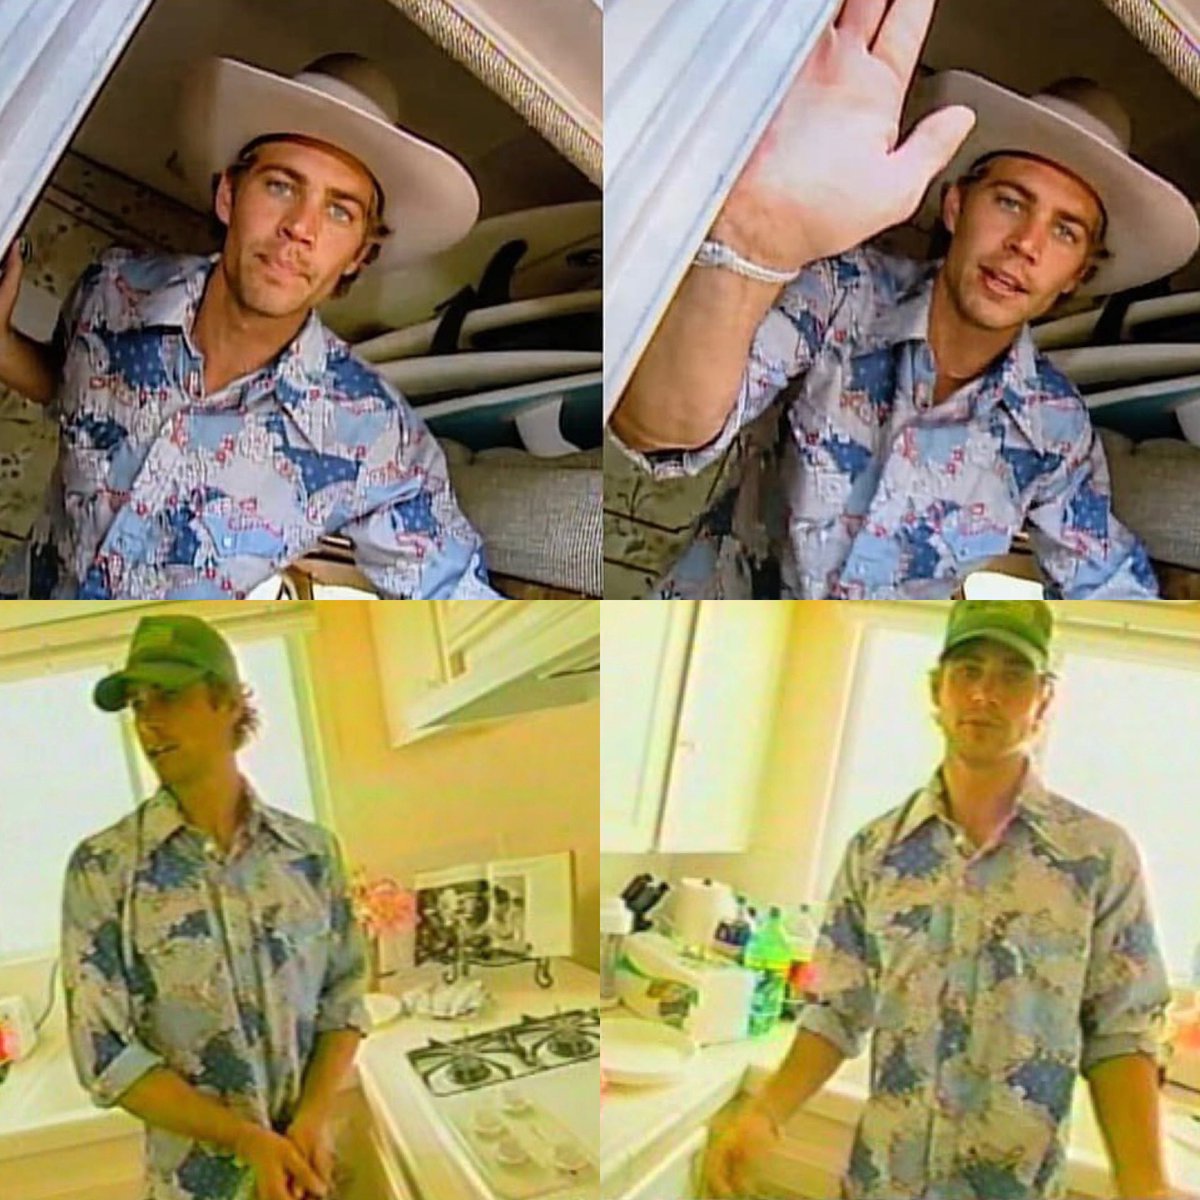 Did you know that in 2001, Paul appeared on MTV Cribs, sharing a tour of his mobile home and the beachfront house he lived in while filming a movie? #FBF #TeamPW